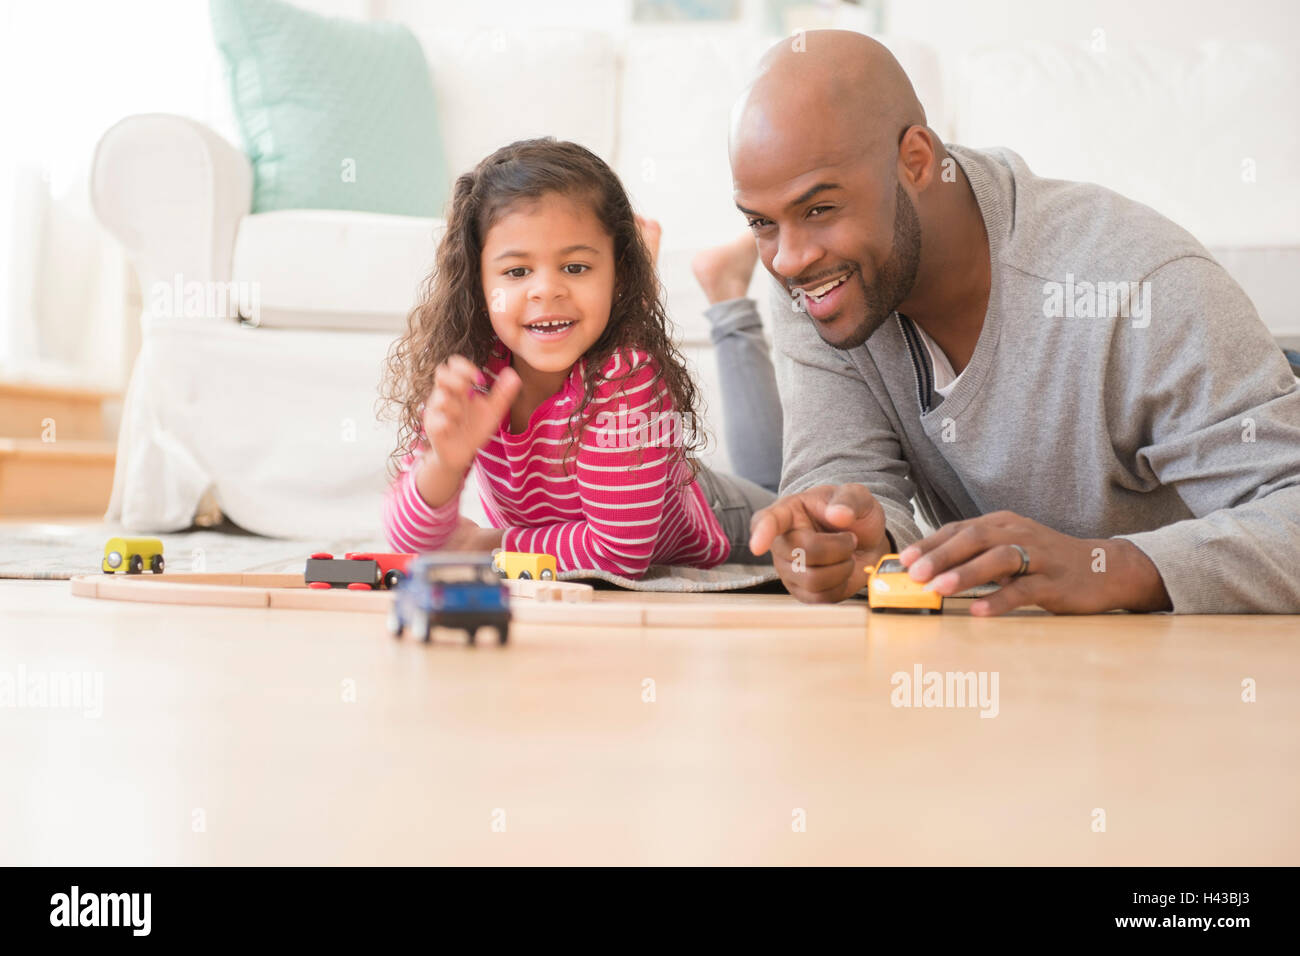 Father and daughter playing with toy cars on floor Stock Photo